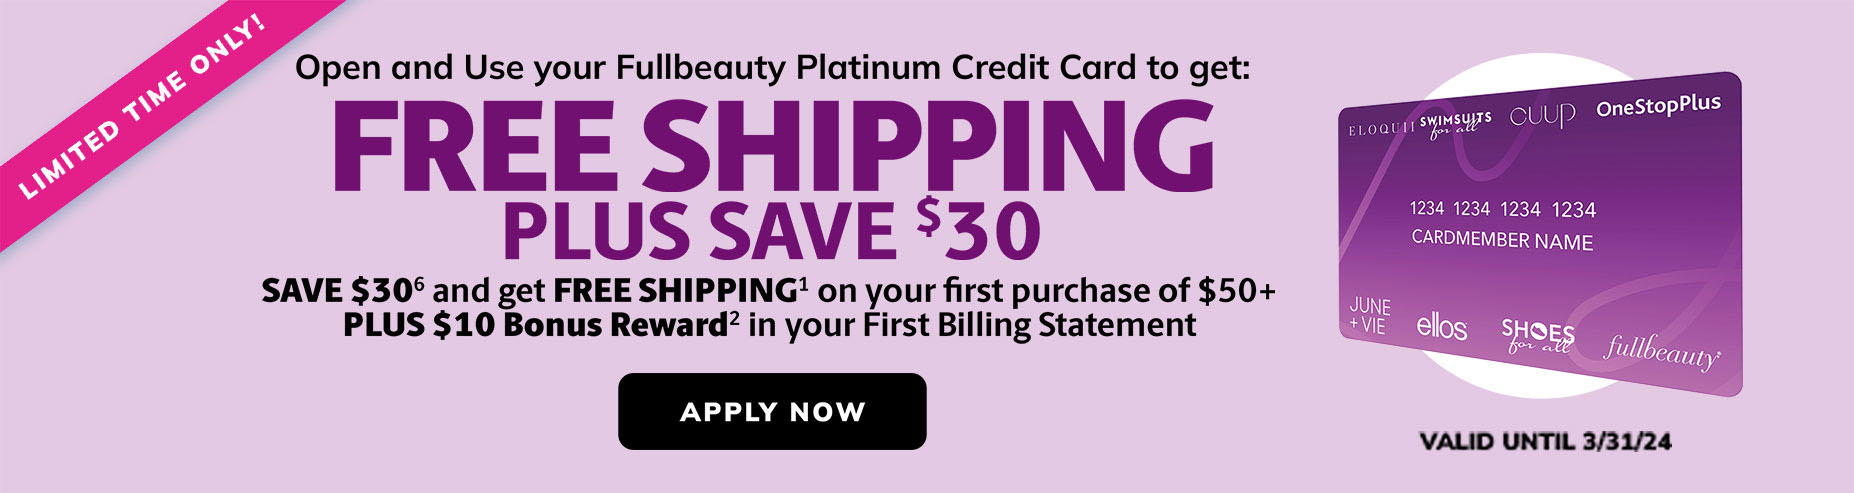 Limited time only! Free shipping with Fullbeauty Platinum credit card